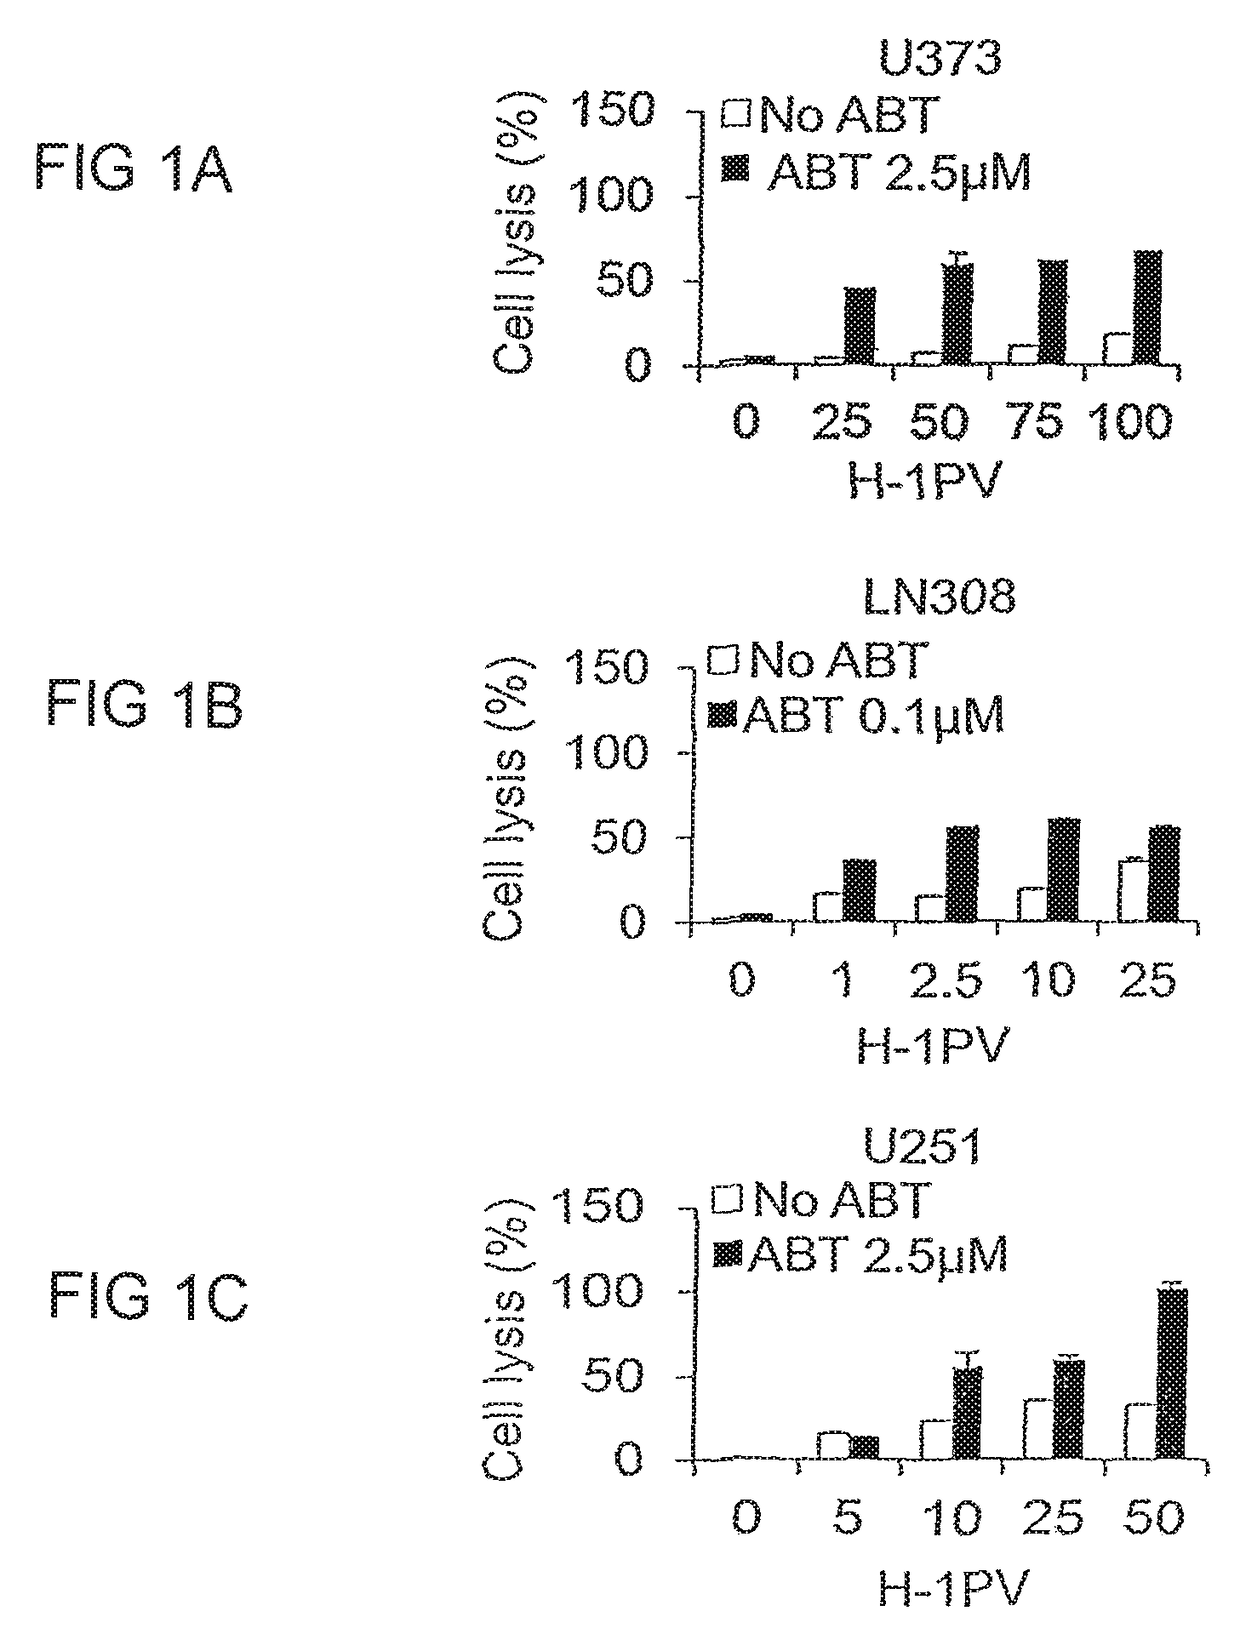 Cancer therapy with a parvovirus combined with a Bcl-2 inhibitor